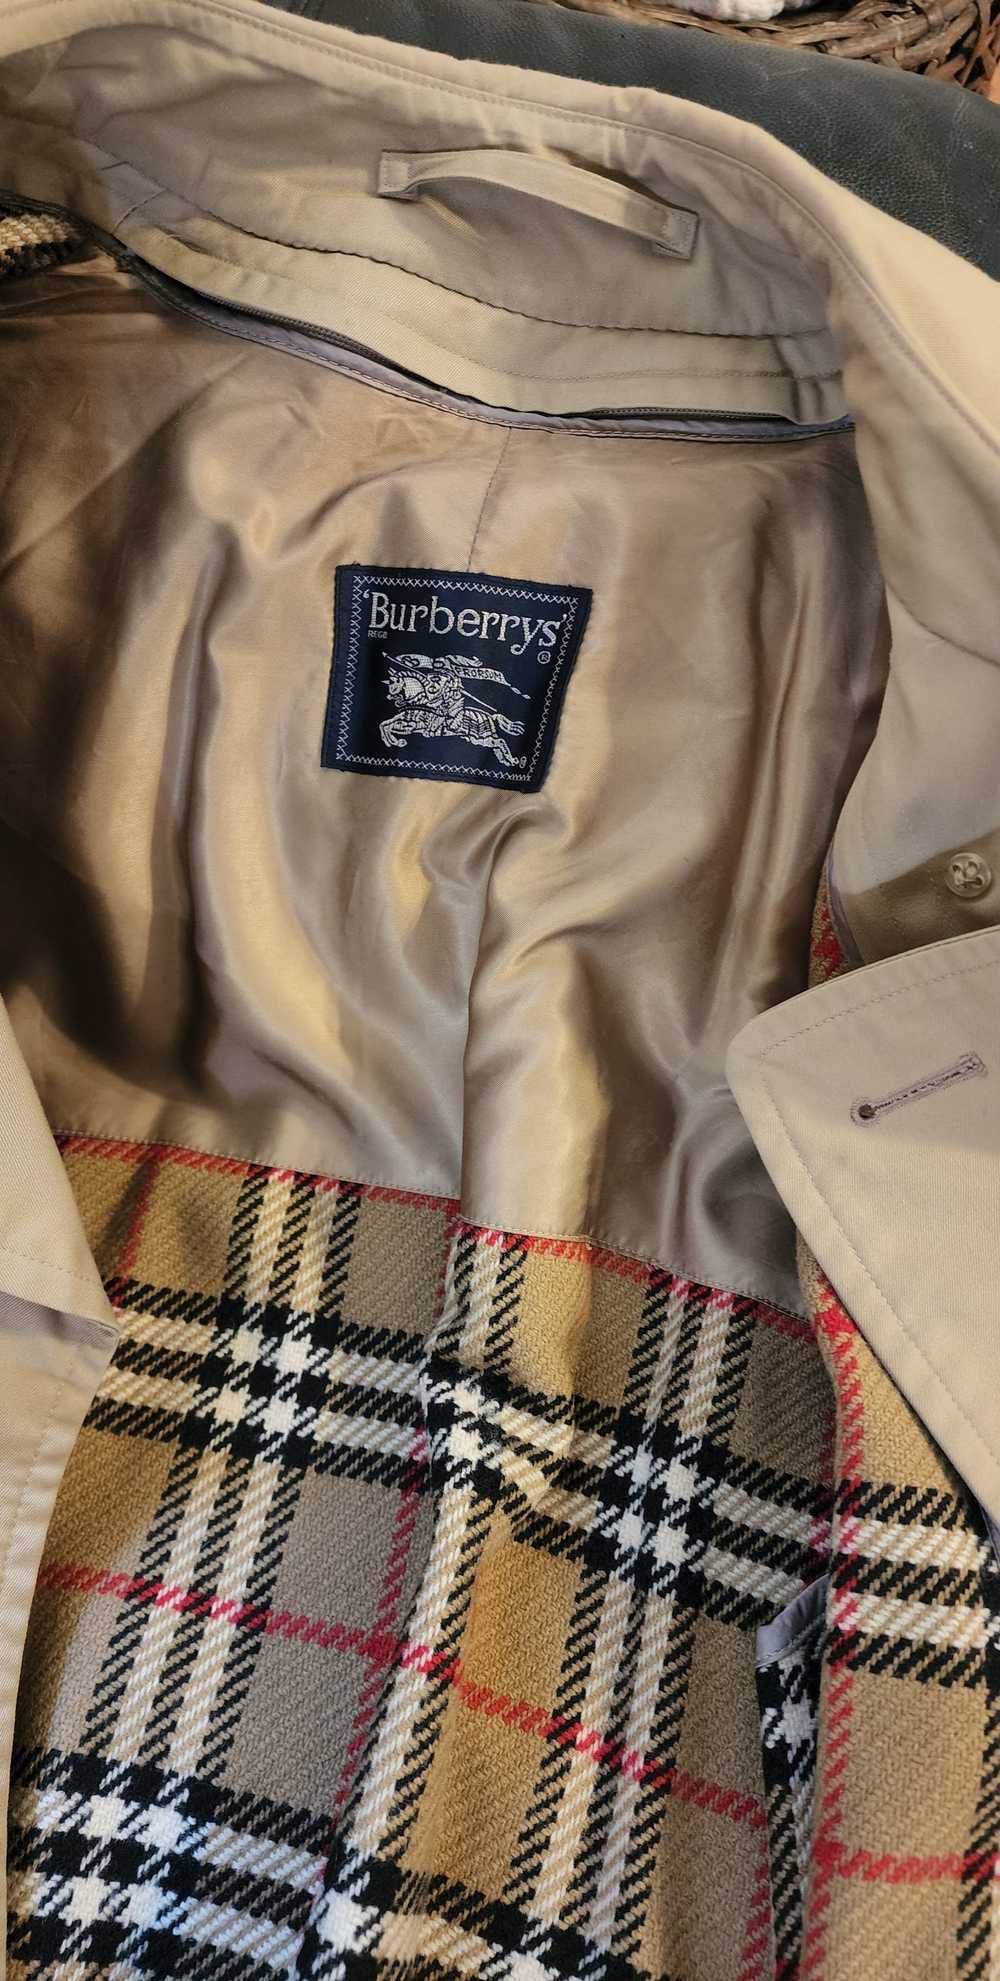 Burberry Burberry Trench Coat - image 3